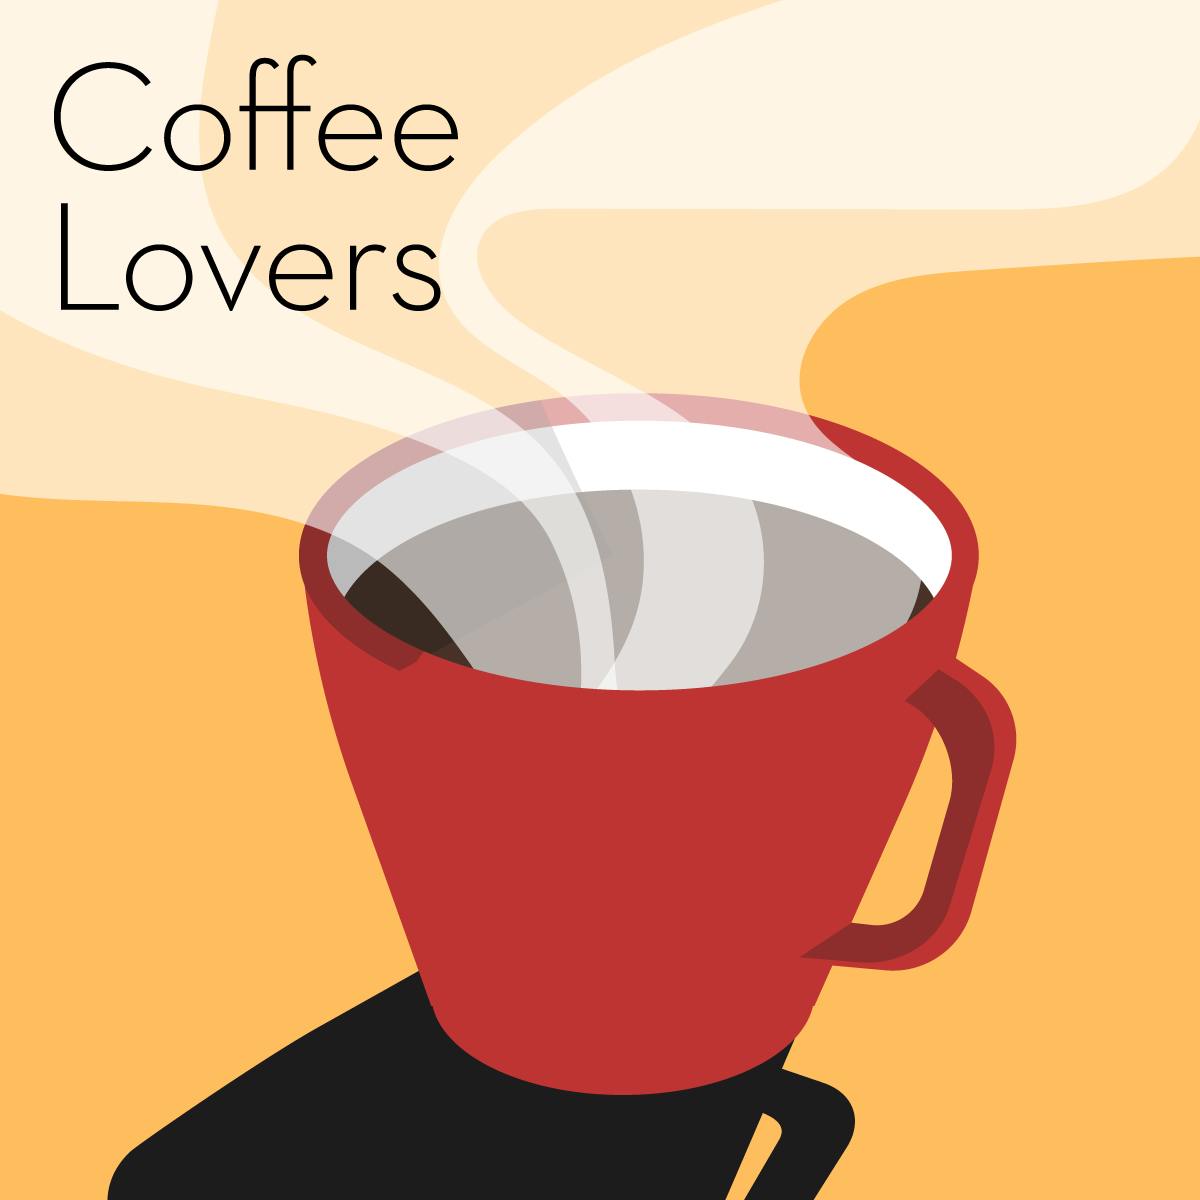 Illustration of a gift guide containing gifts for coffee lovers. Illustration shows a red cup of steaming coffee on an orange background.